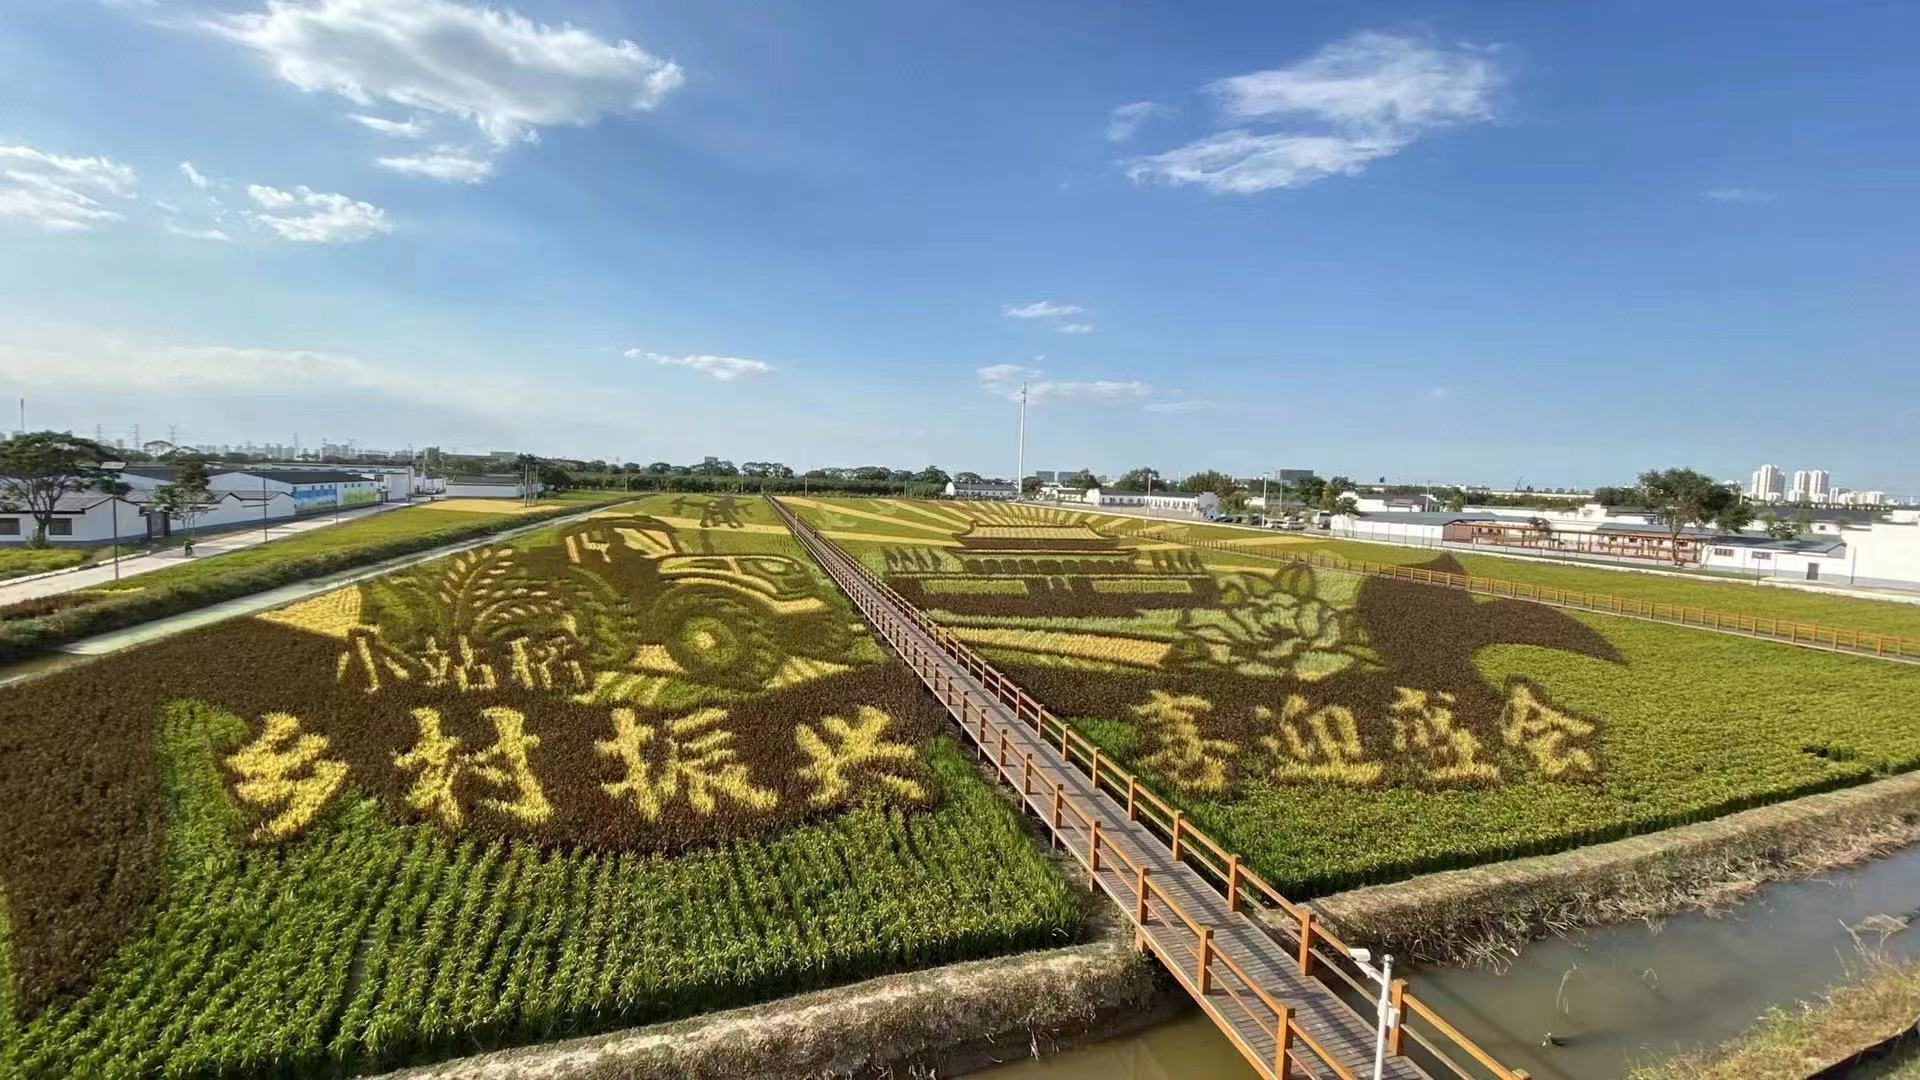 Paddy field of Xiaozhan Rice in north China's Tianjin Municipality. /Agriculture and Rural Affairs Committee of Tianjin Municipality